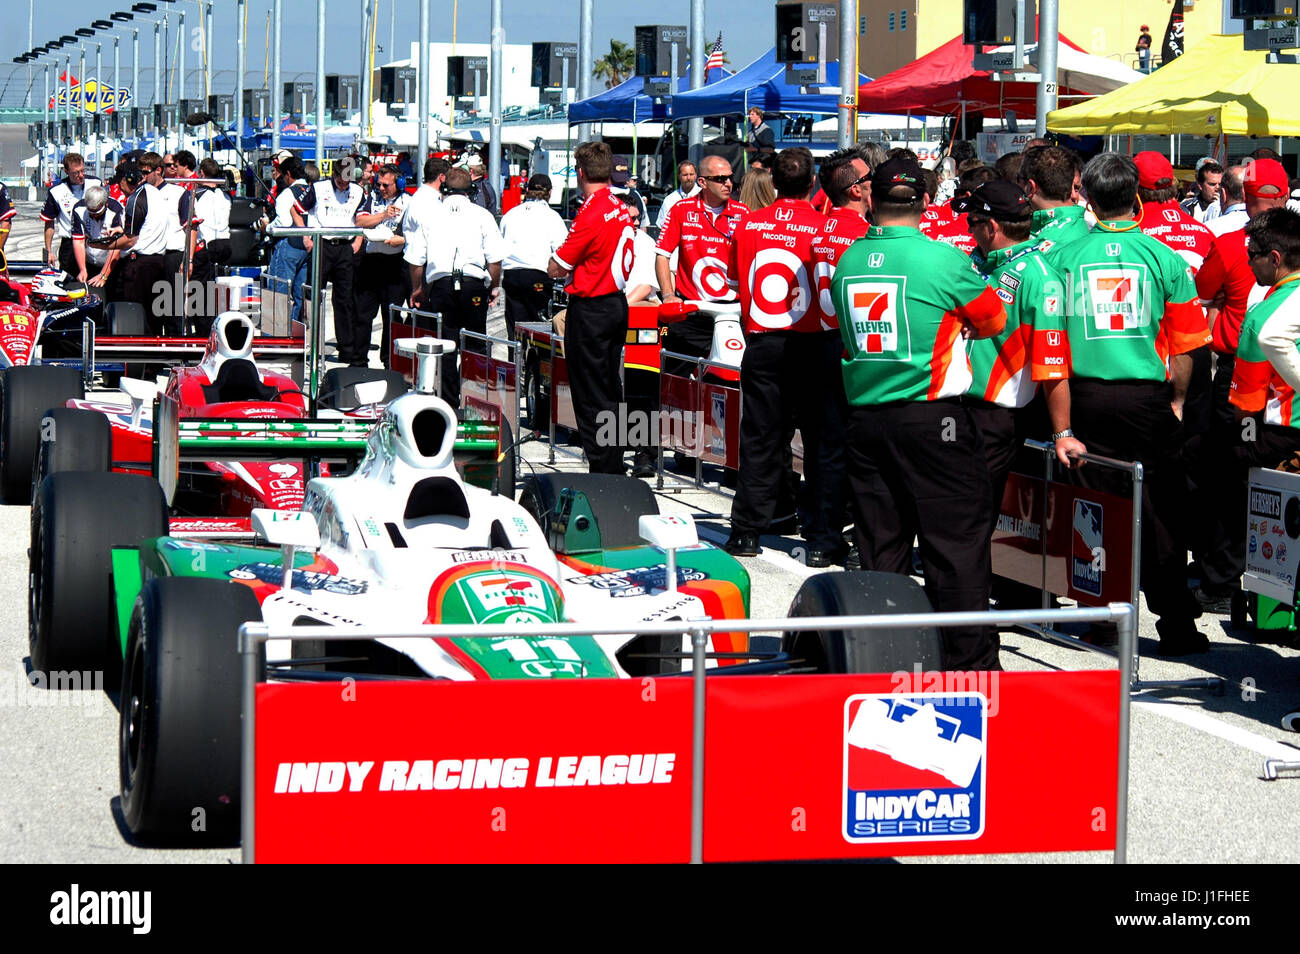 Indy racing Miami Homestead Speedway  racing cars Stock Photo